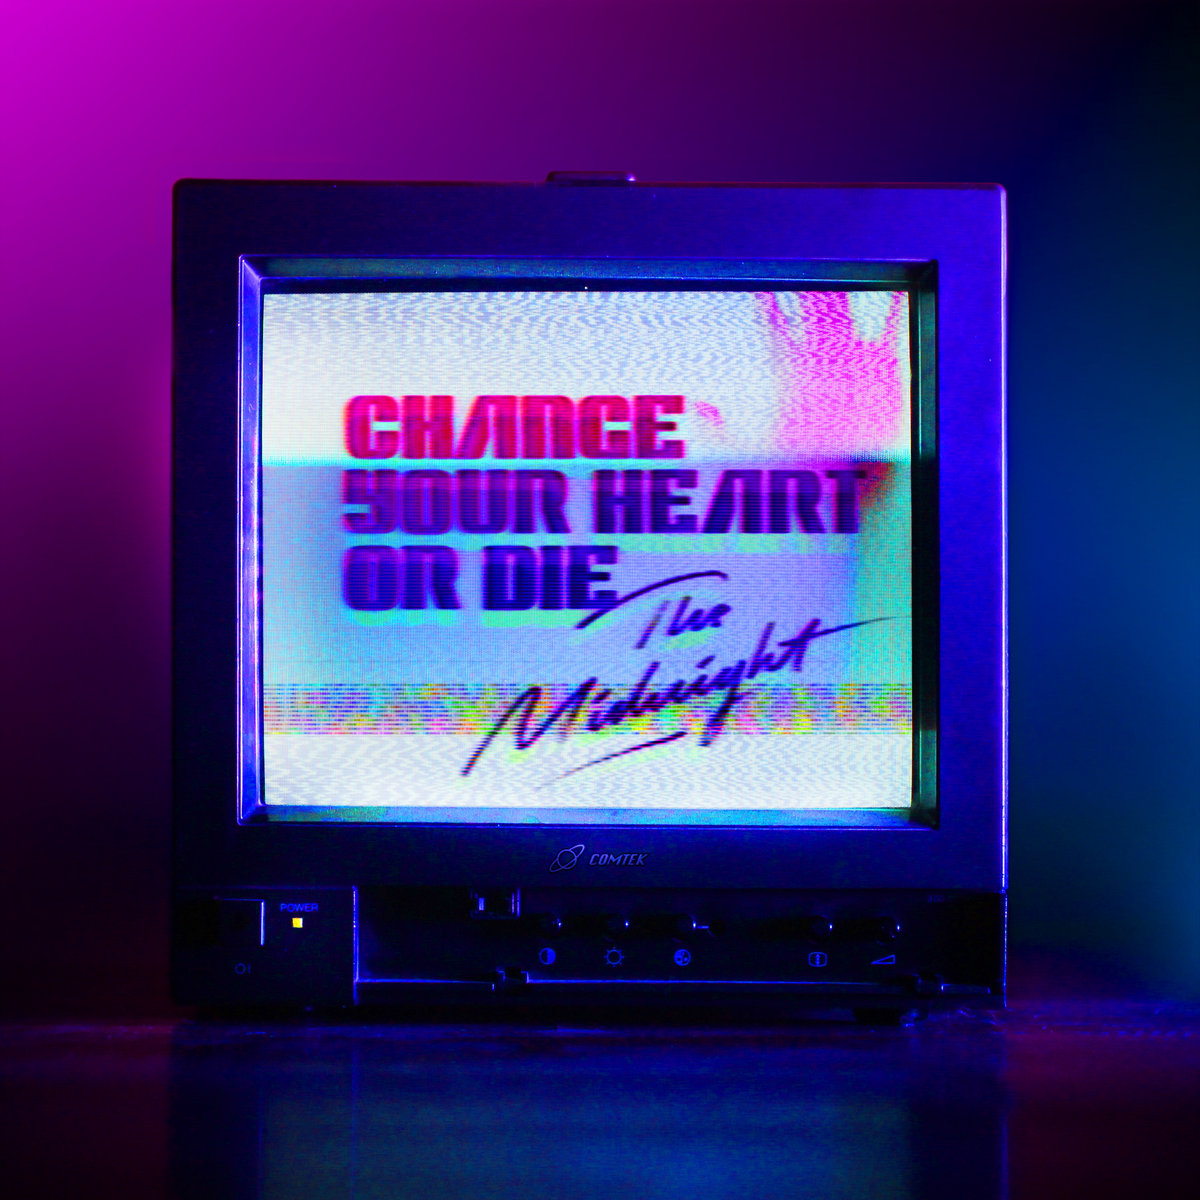 The Midnight Change Your Heart or Die cover artwork